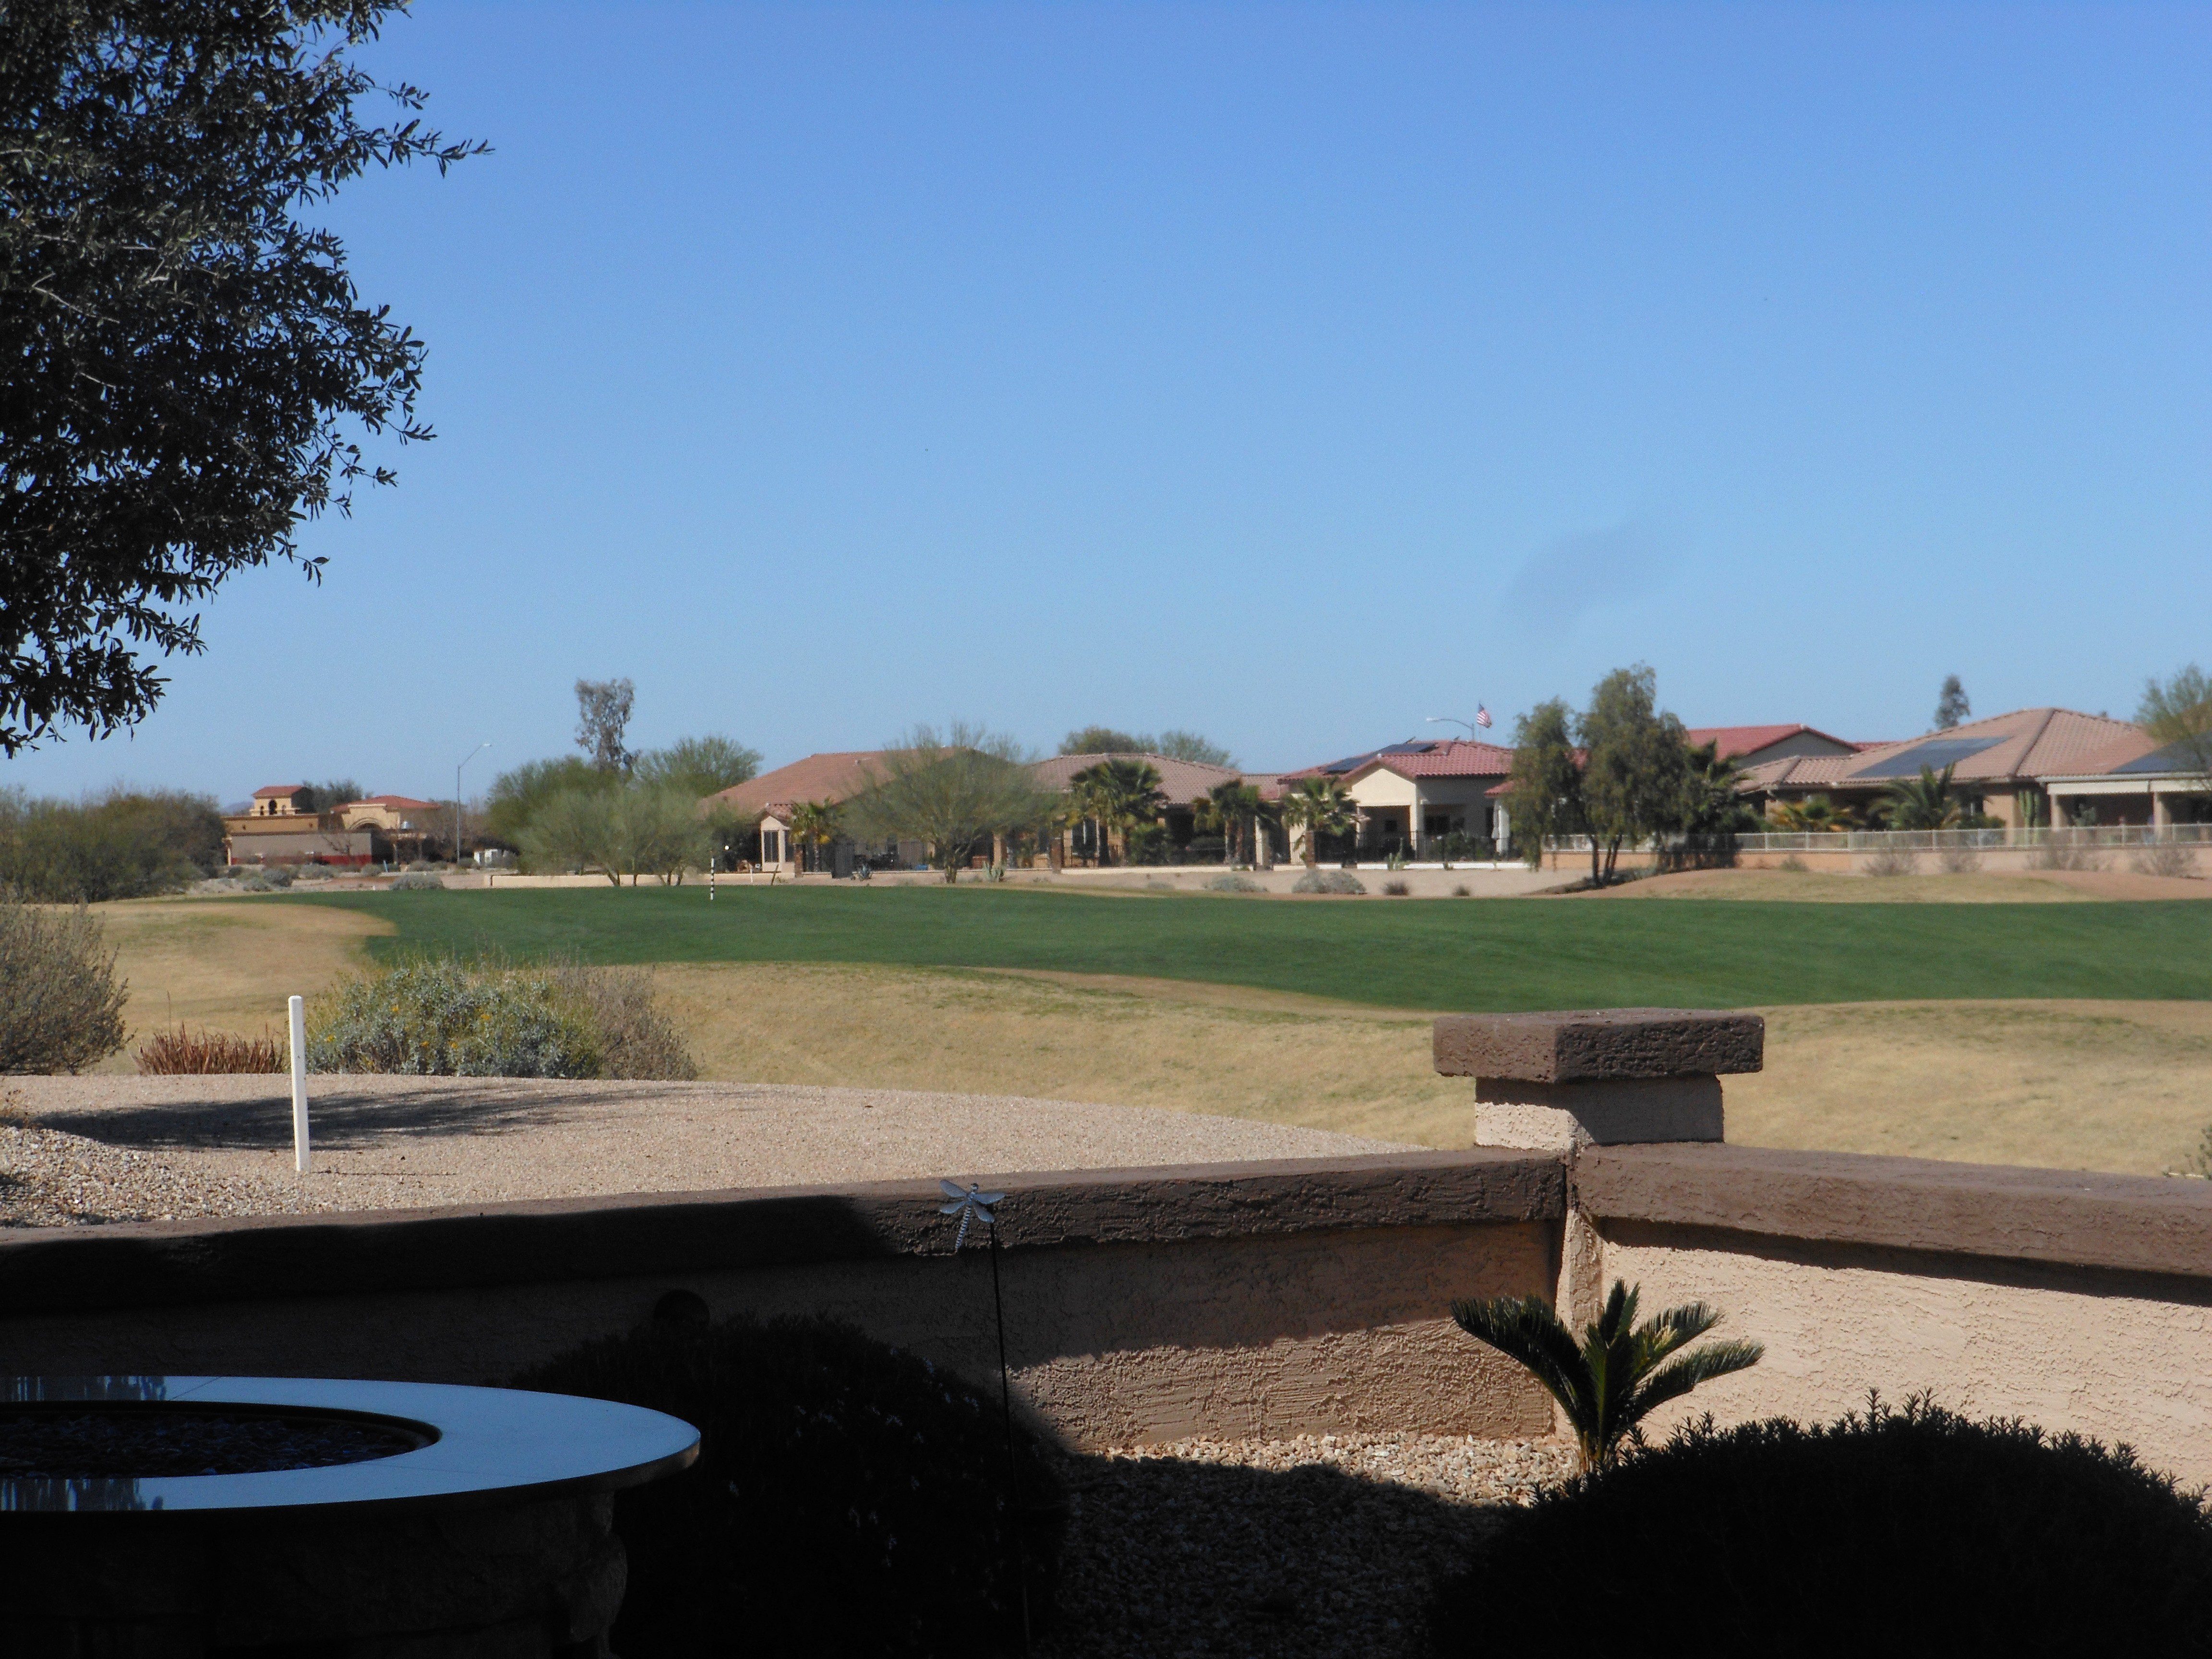 Views of the 17th fairway of the Golf Course, South Facing Patio, partial block wall